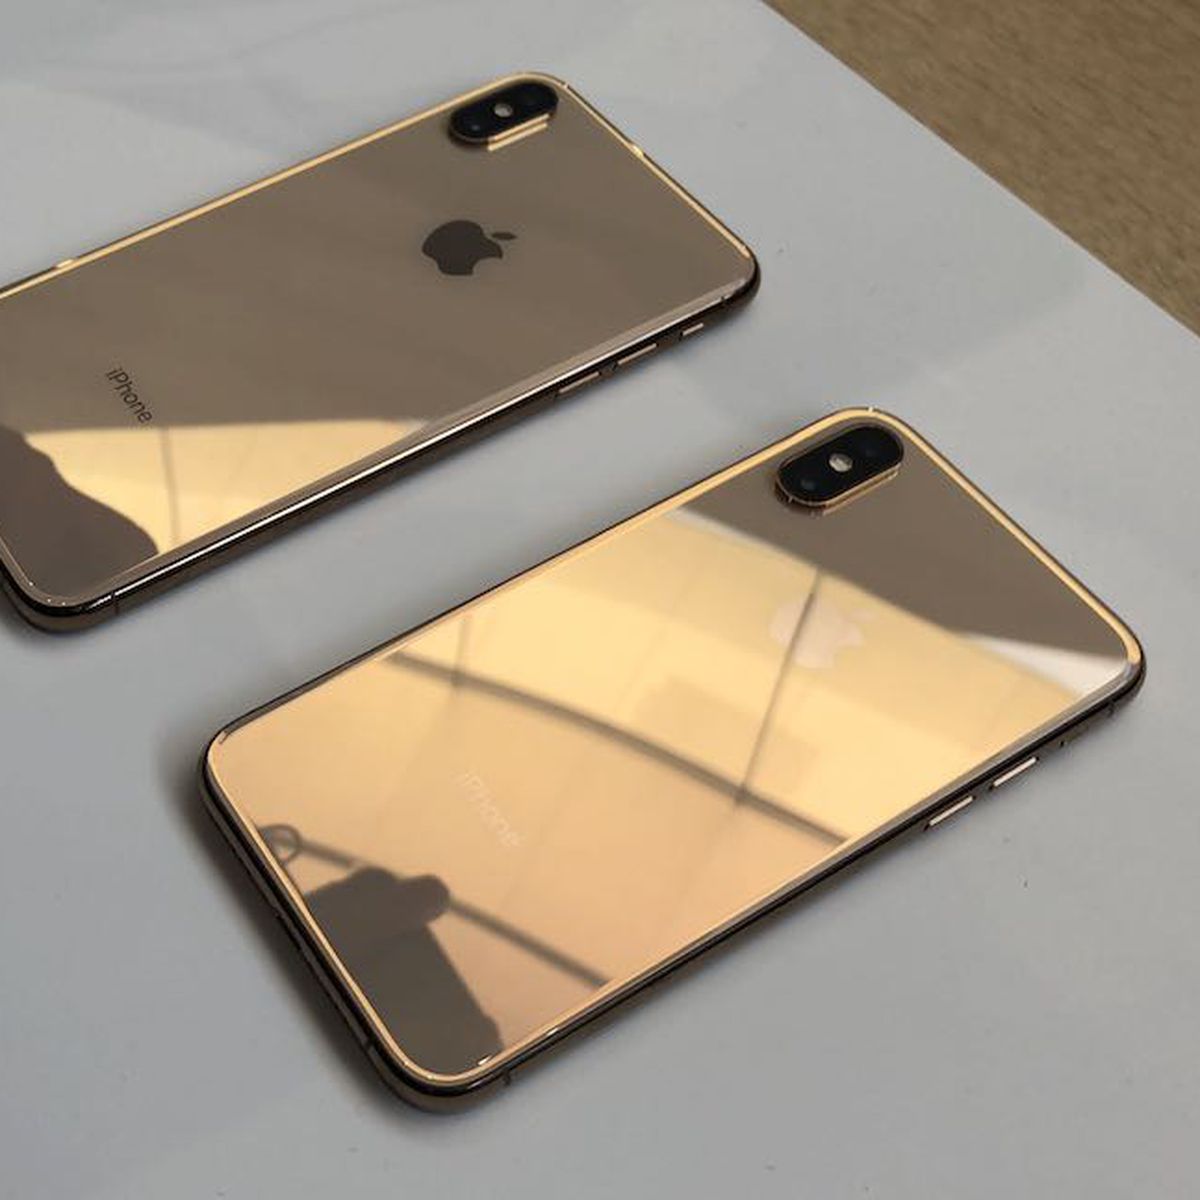 iPhone XS Max is Apple's Most Expensive iPhone Model to Date at $1,449 for  512GB - MacRumors